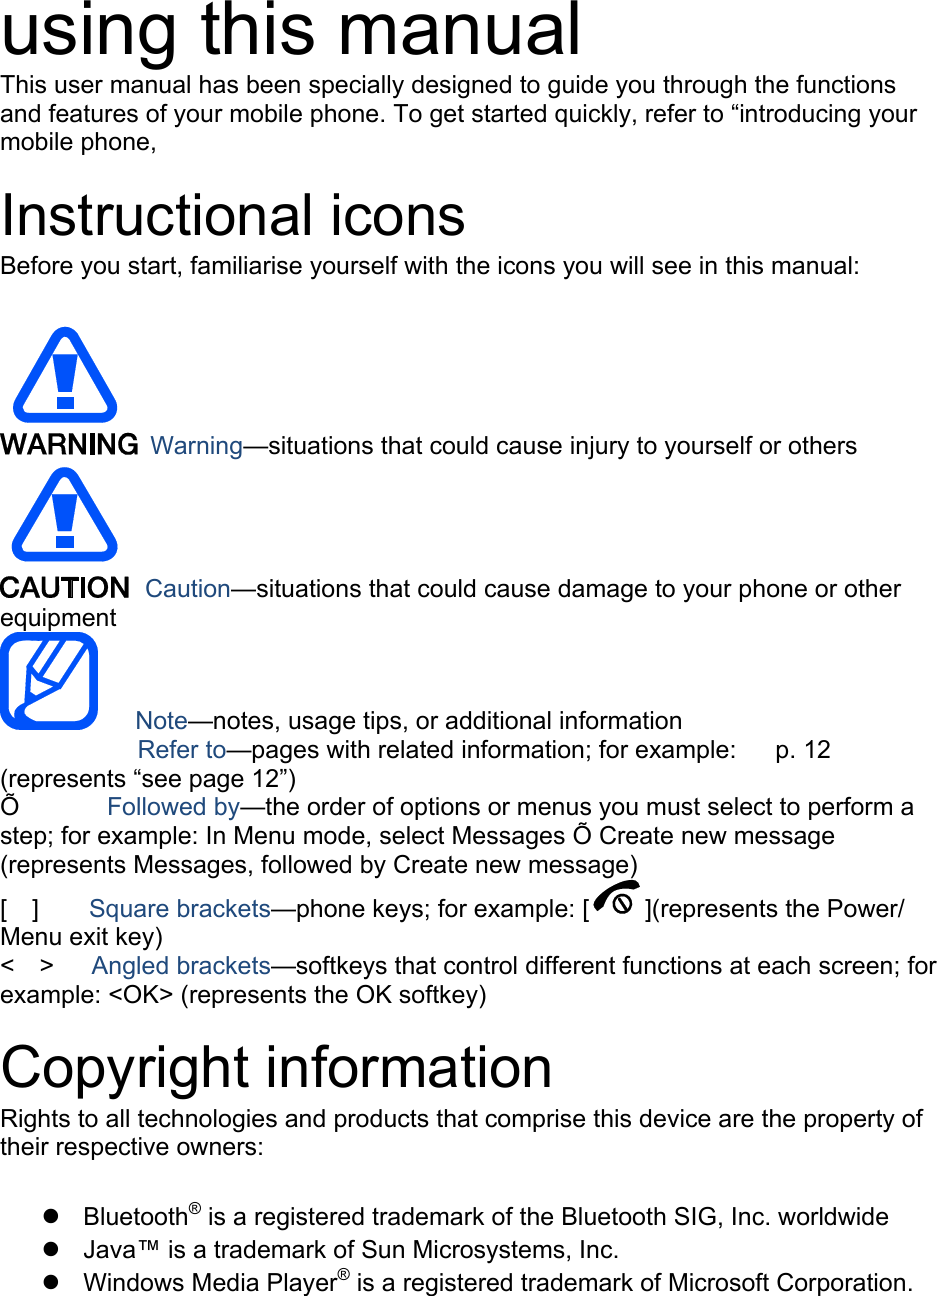 using this manual This user manual has been specially designed to guide you through the functions and features of your mobile phone. To get started quickly, refer to “introducing your mobile phone,  Instructional icons Before you start, familiarise yourself with the icons you will see in this manual:     Warning—situations that could cause injury to yourself or others  Caution—situations that could cause damage to your phone or other equipment    Note—notes, usage tips, or additional information   　       Refer to—pages with related information; for example:   p. 12 　(represents “see page 12”) Õ       Followed by—the order of options or menus you must select to perform a step; for example: In Menu mode, select Messages Õ Create new message (represents Messages, followed by Create new message) [  ]    Square brackets—phone keys; for example: [ ](represents the Power/ Menu exit key) &lt;  &gt;   Angled brackets—softkeys that control different functions at each screen; for example: &lt;OK&gt; (represents the OK softkey)  Copyright information Rights to all technologies and products that comprise this device are the property of their respective owners:  z Bluetooth® is a registered trademark of the Bluetooth SIG, Inc. worldwide z  Java™ is a trademark of Sun Microsystems, Inc. z Windows Media Player® is a registered trademark of Microsoft Corporation.  